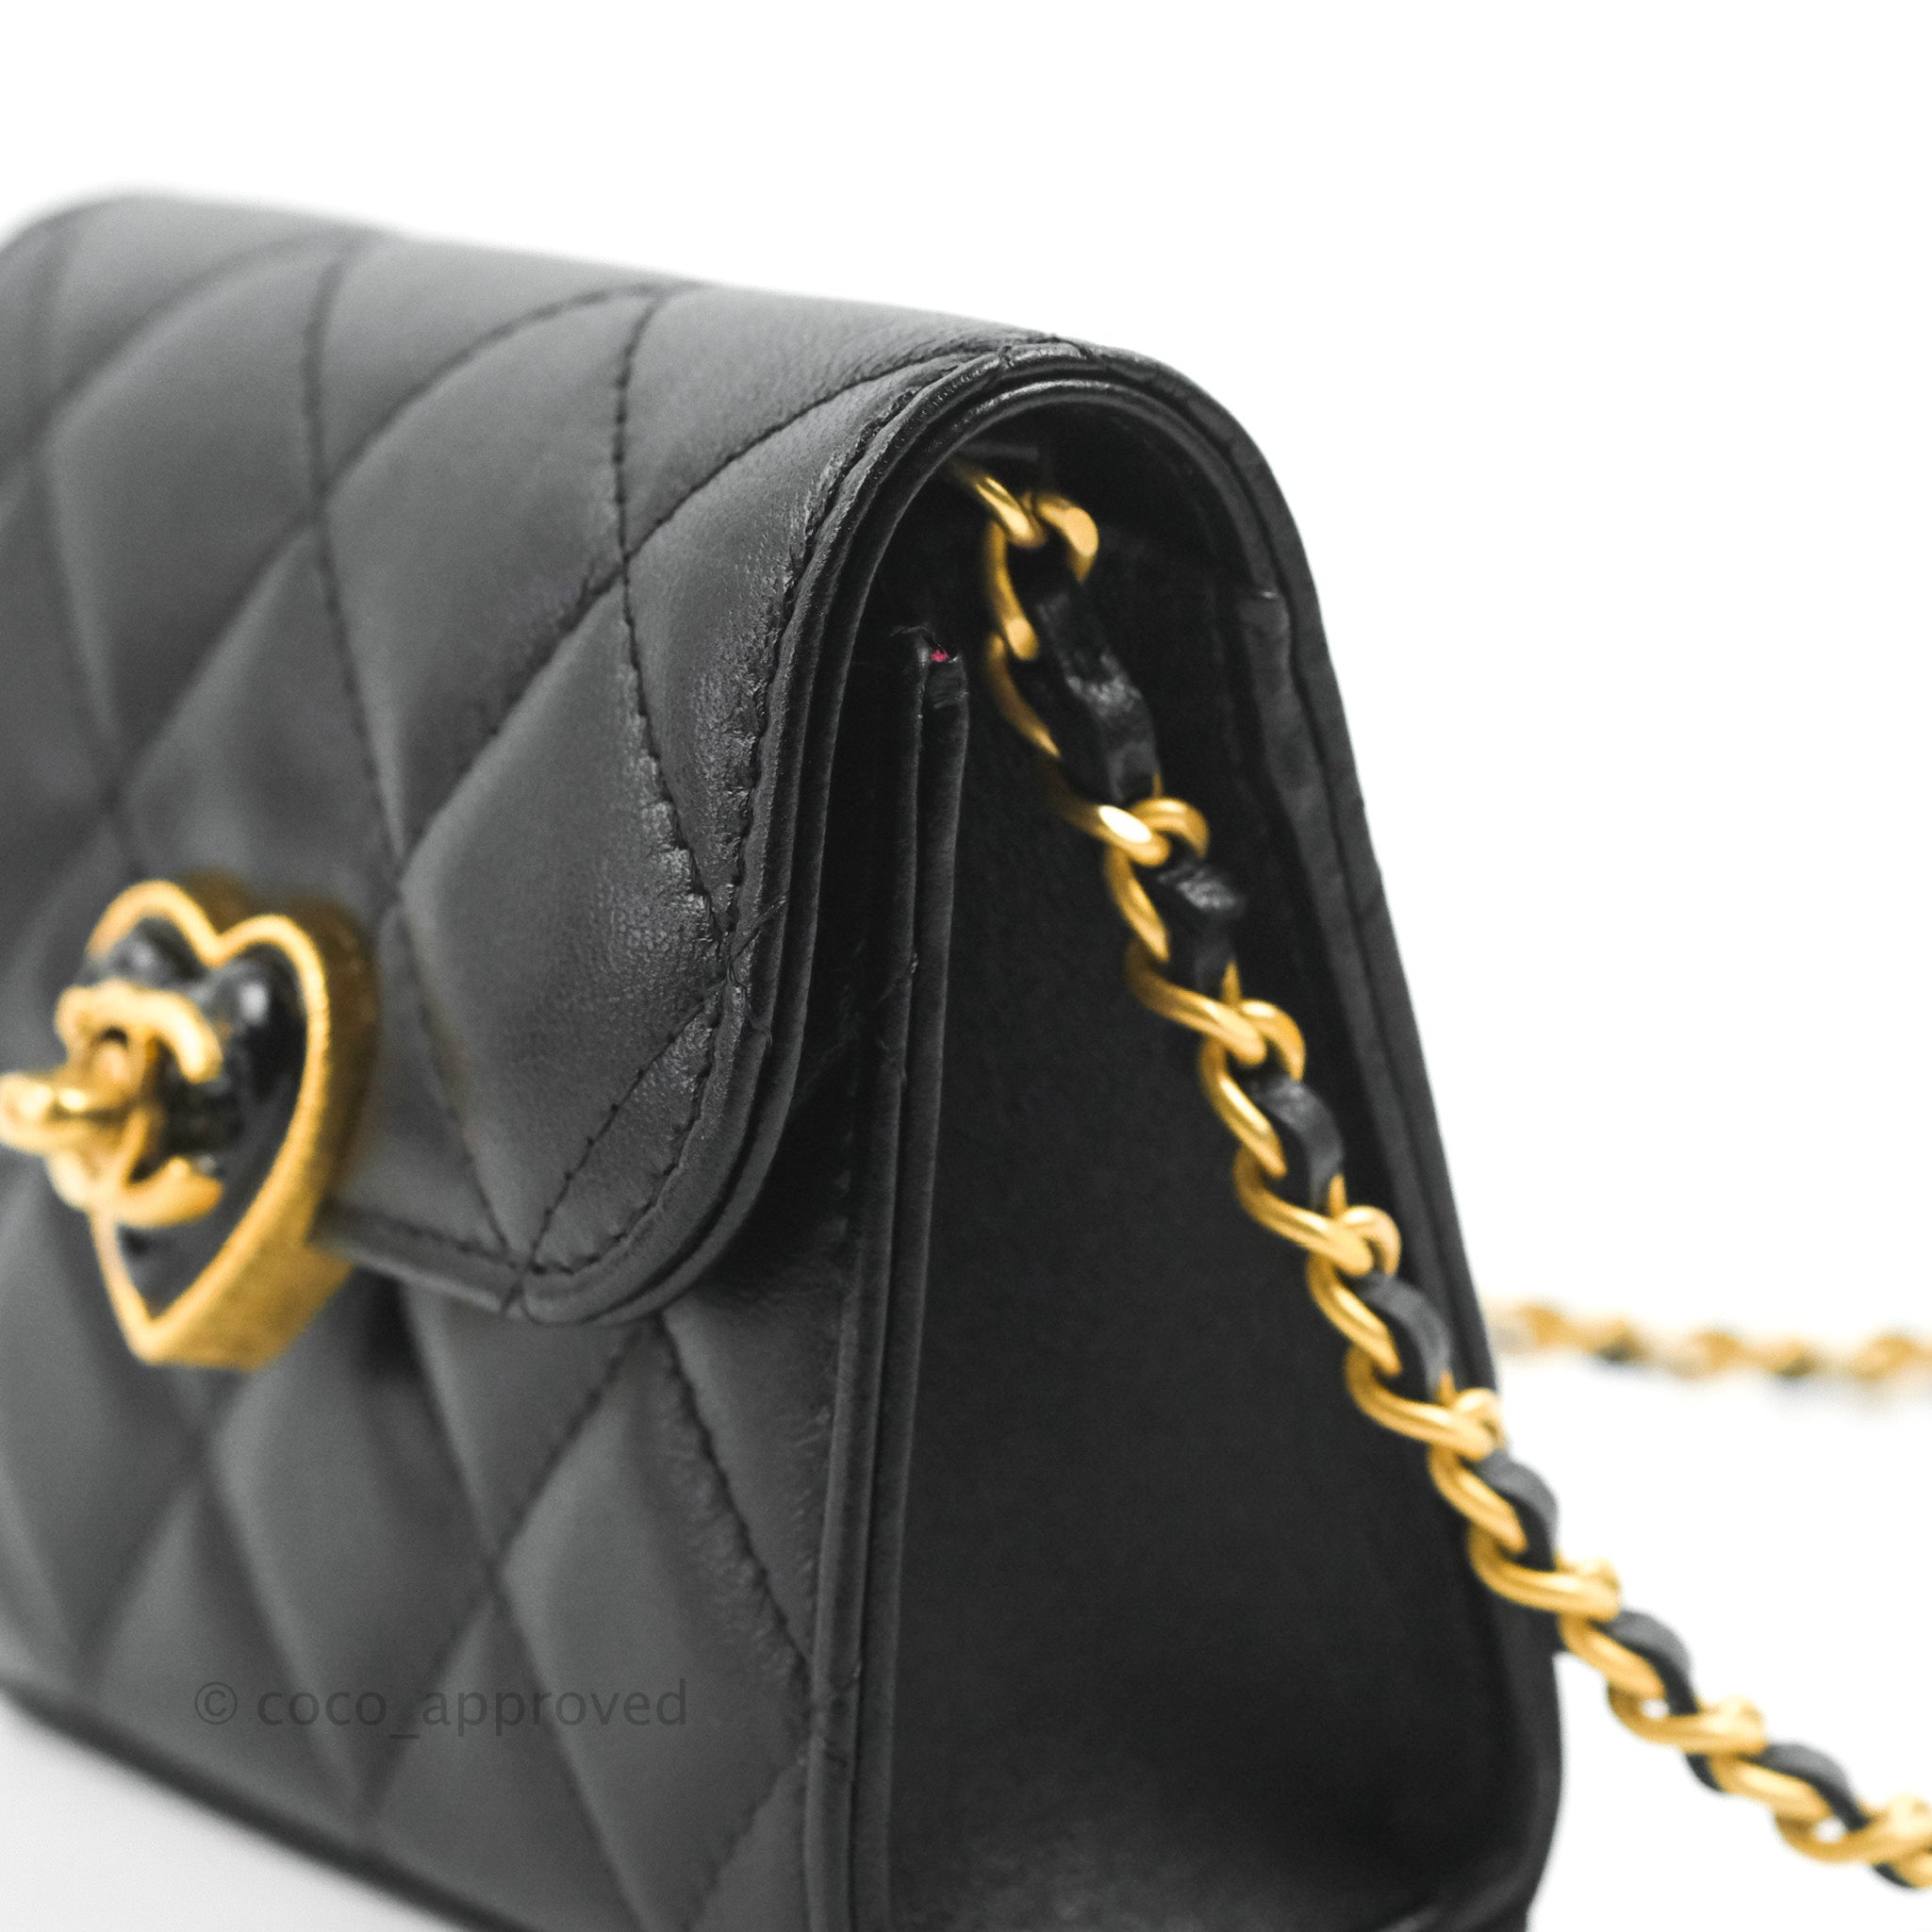 Chanel Heart Clutch With Chain - ShopStyle